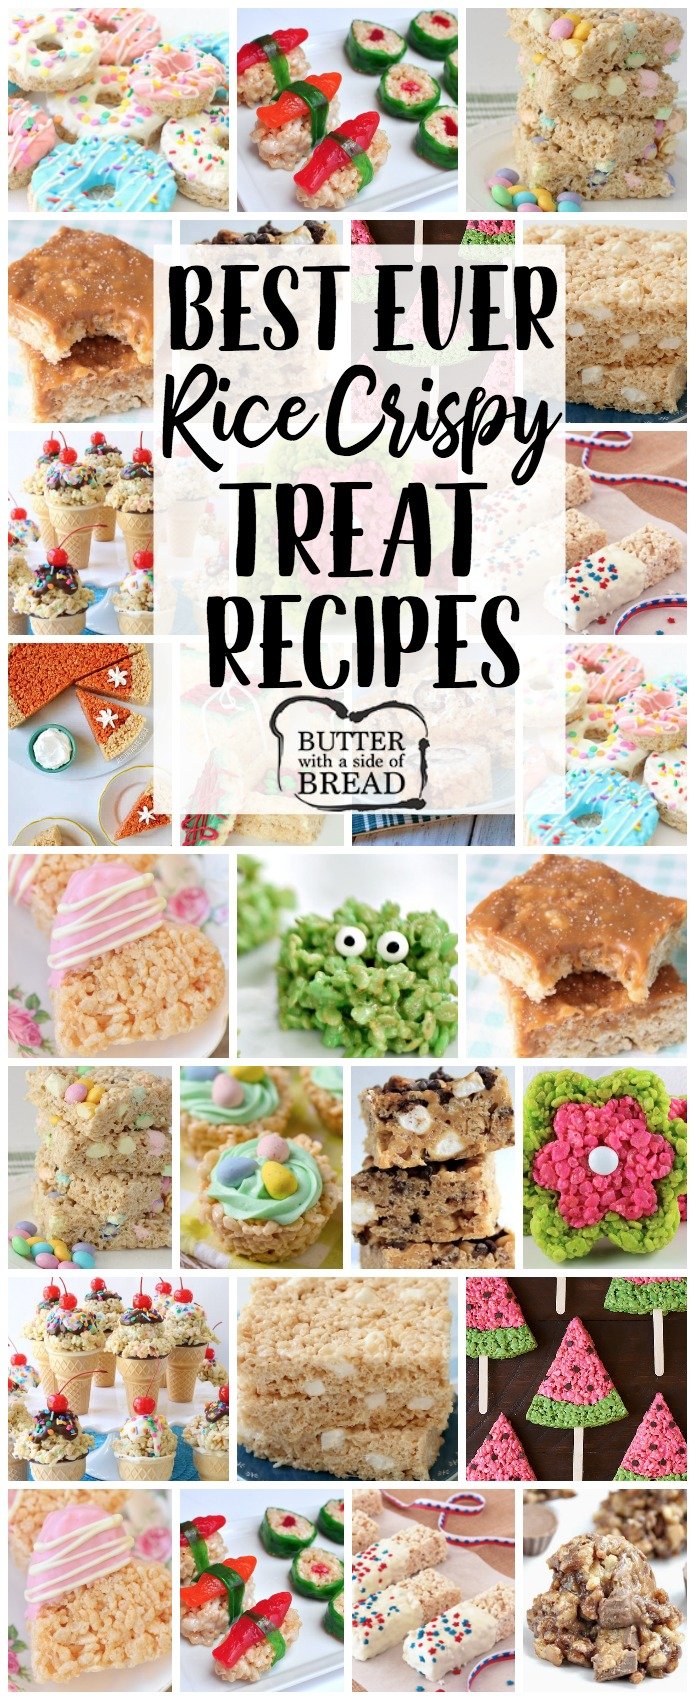 Rice Krispie Treats recipe for any and all occasions! From salted caramel to churro and everything in between, you're sure to find a rice crispy treats recipe you'll love. Our basic recipe for Krispie Treats is THE BEST!